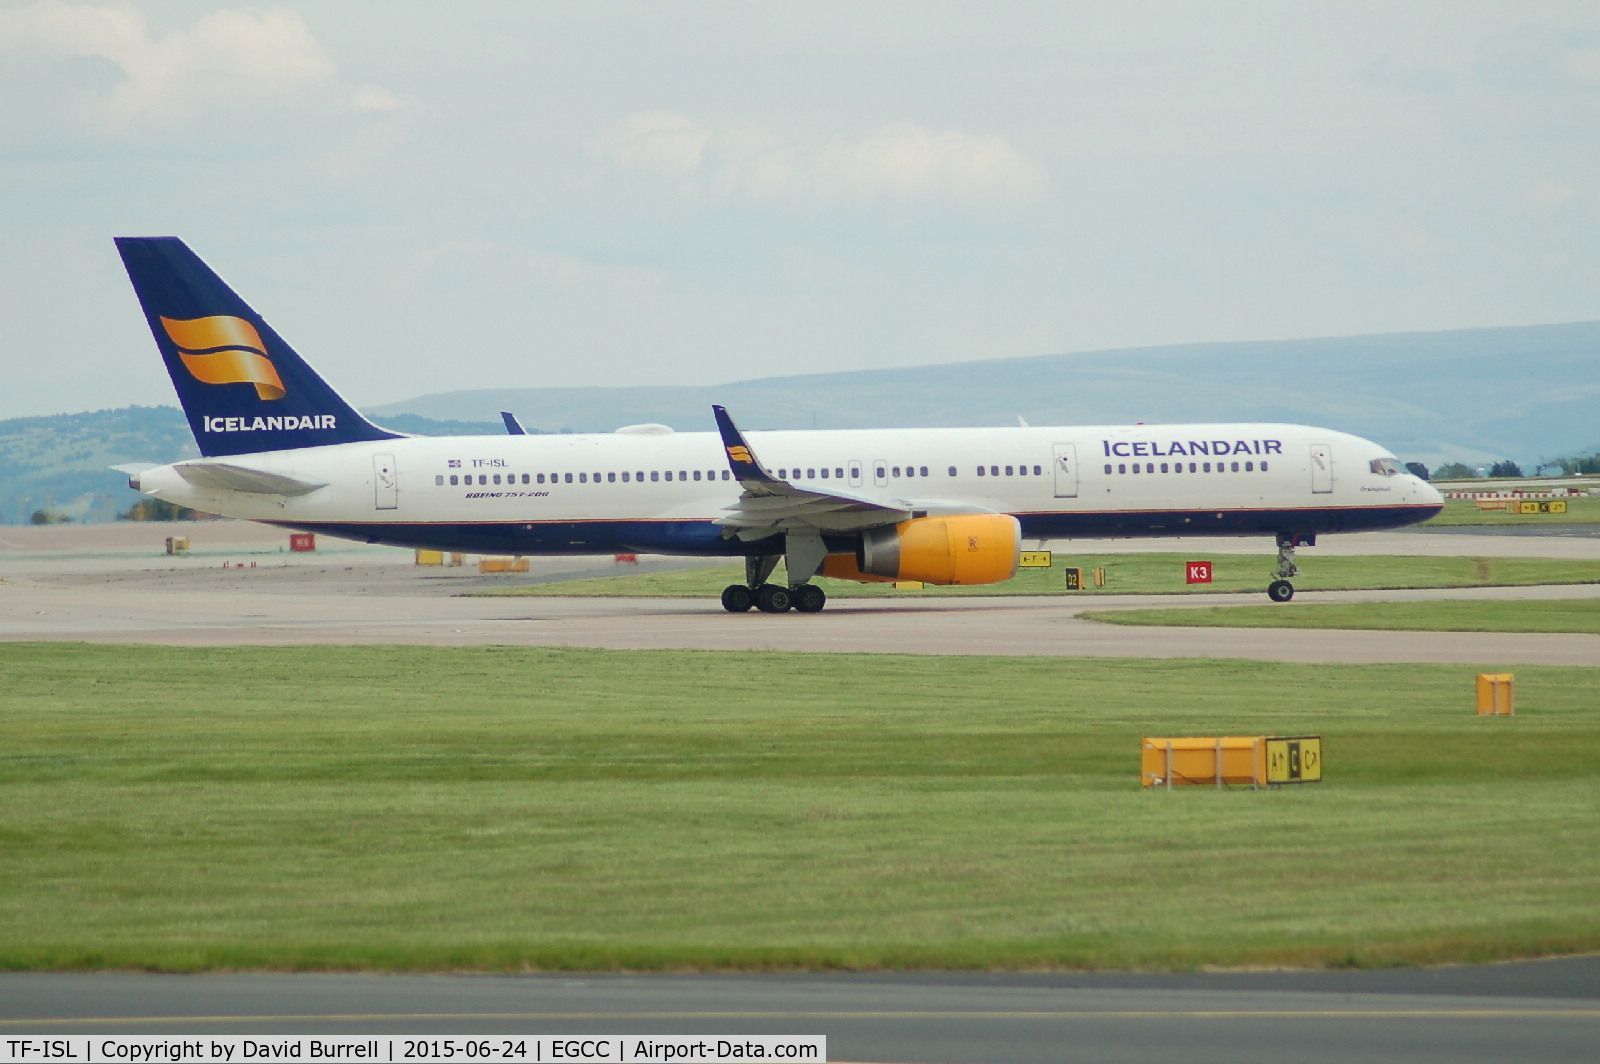 TF-ISL, 1991 Boeing 757-223 C/N 25295, Icelandair Boeing 757-223 taking for take off at Manchester Airport.